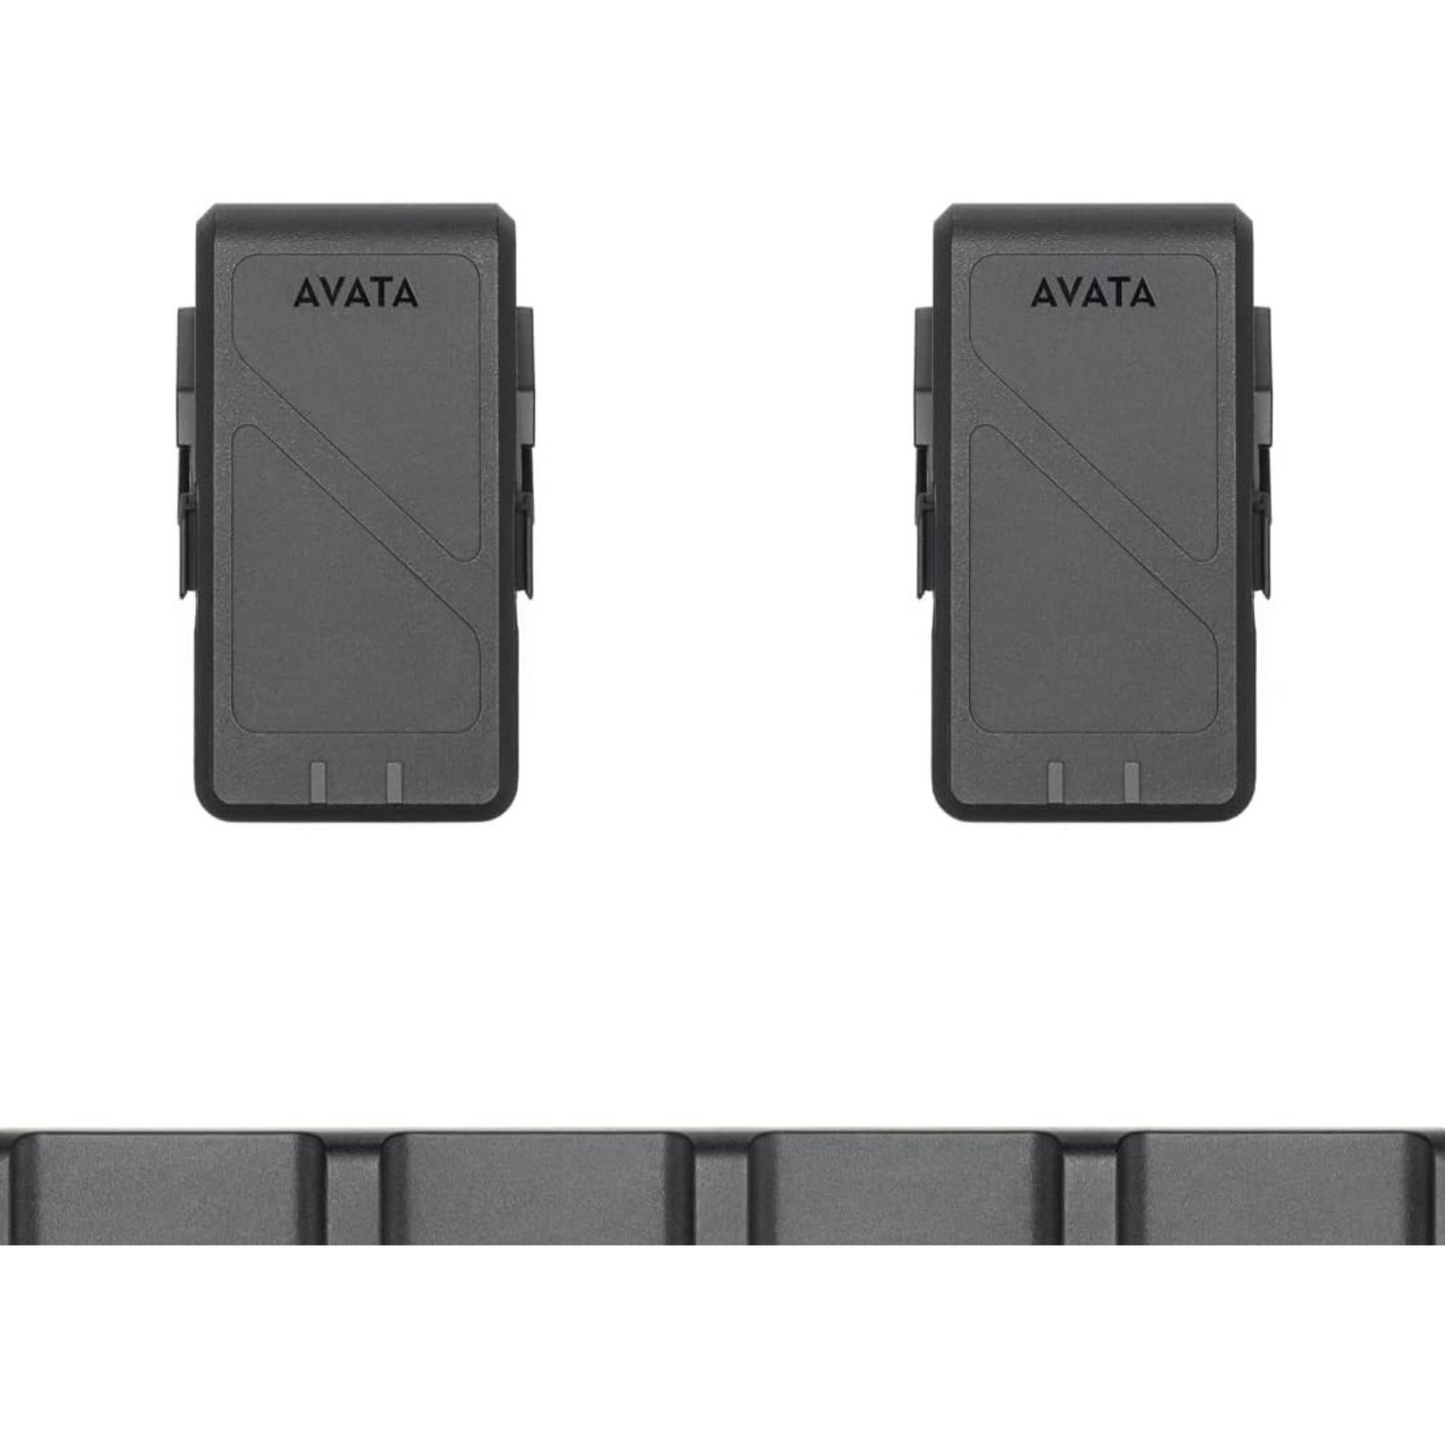 Dji Avata Fly More Kit Drone accessories